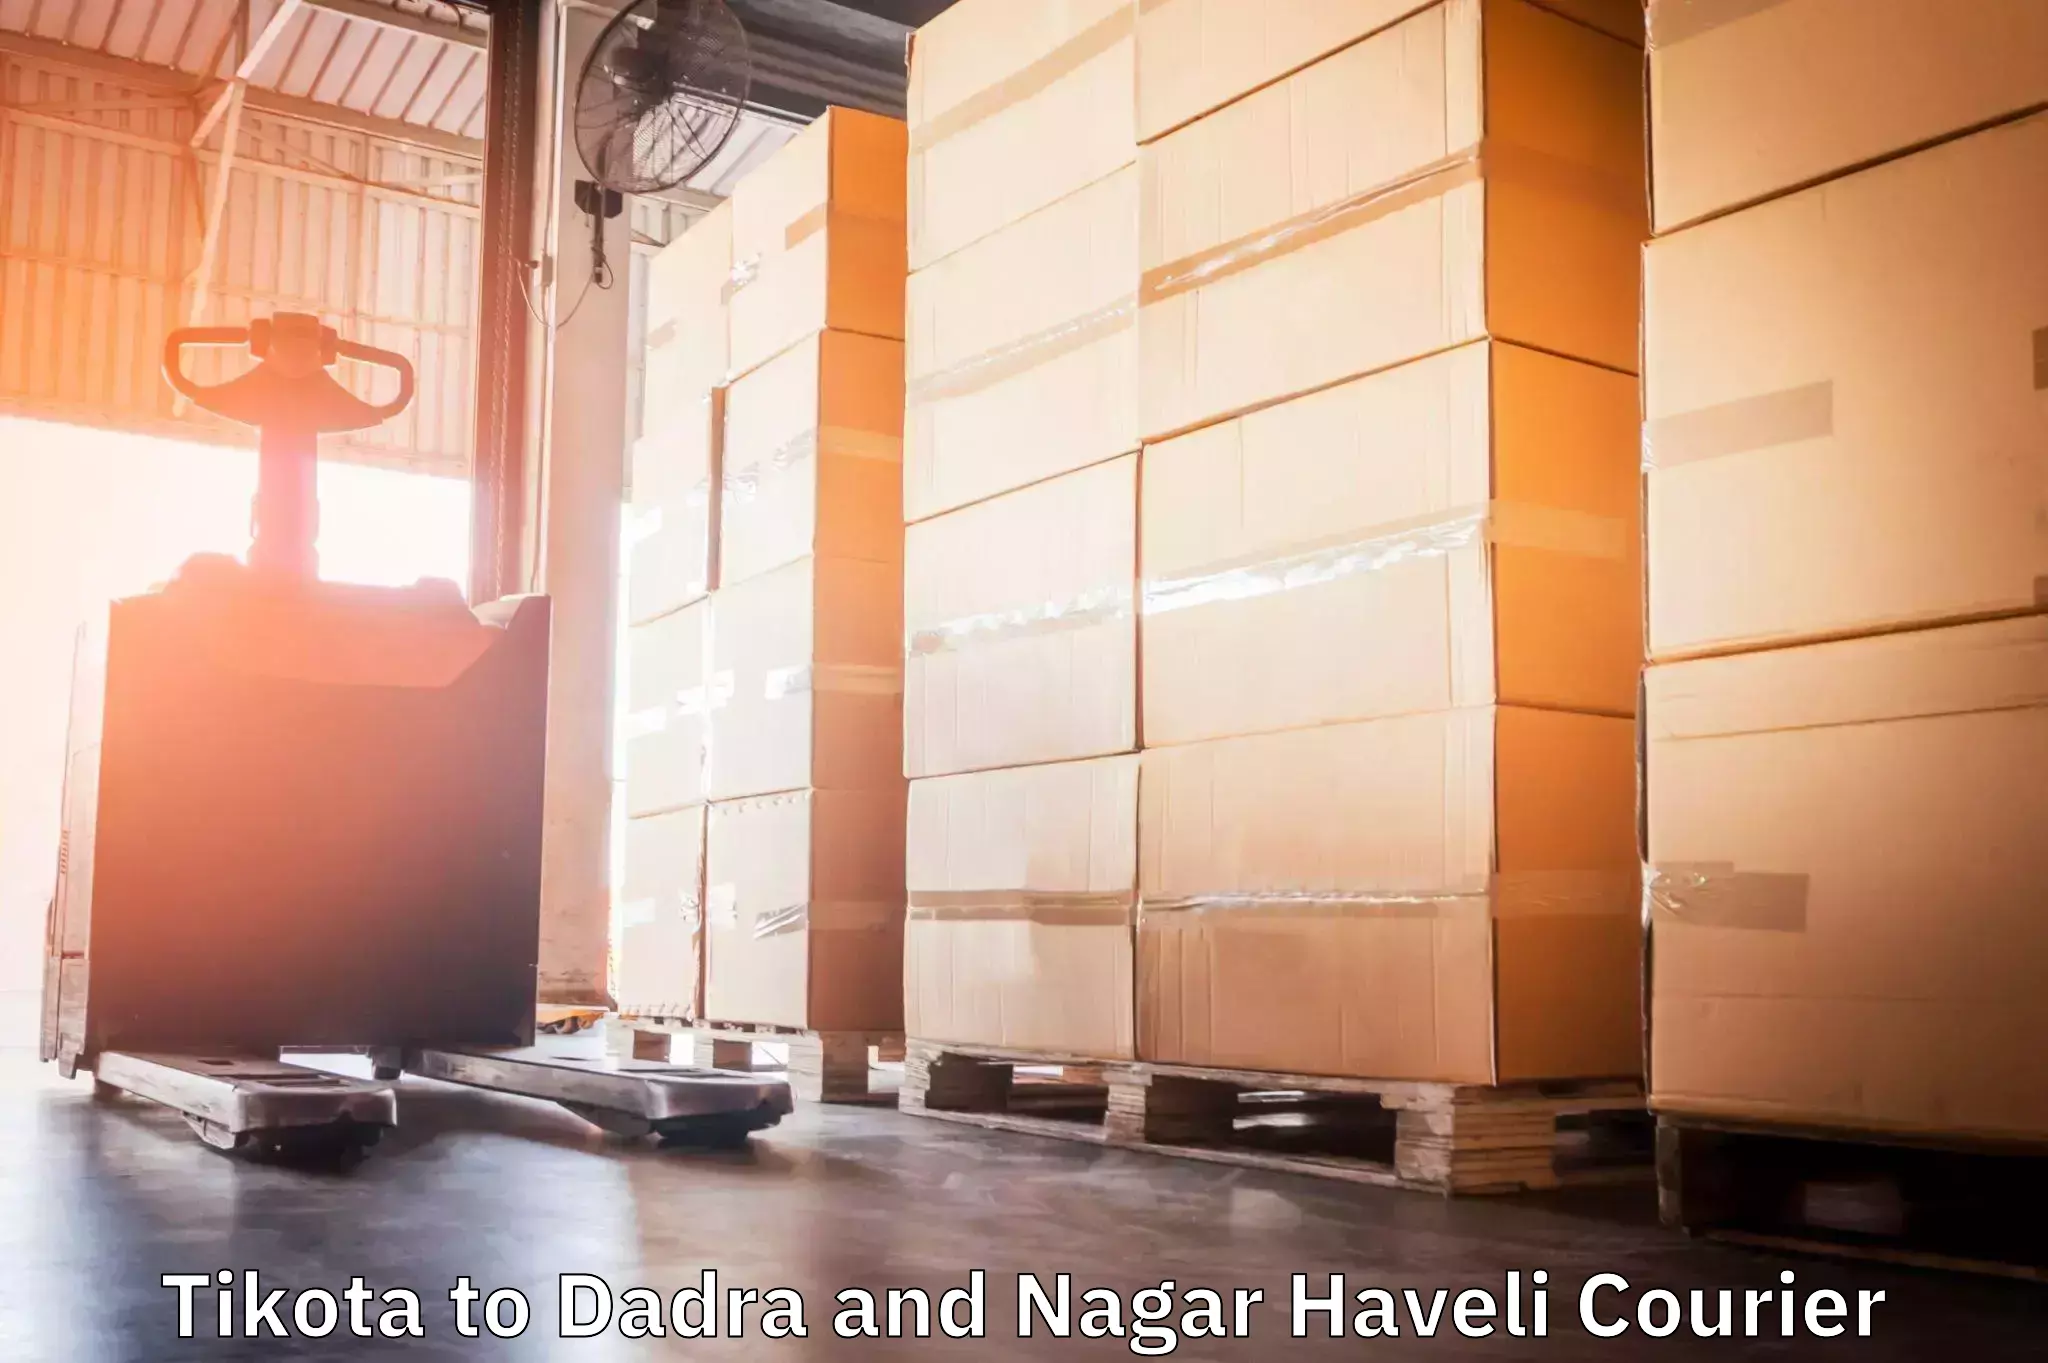 Express delivery capabilities in Tikota to Dadra and Nagar Haveli